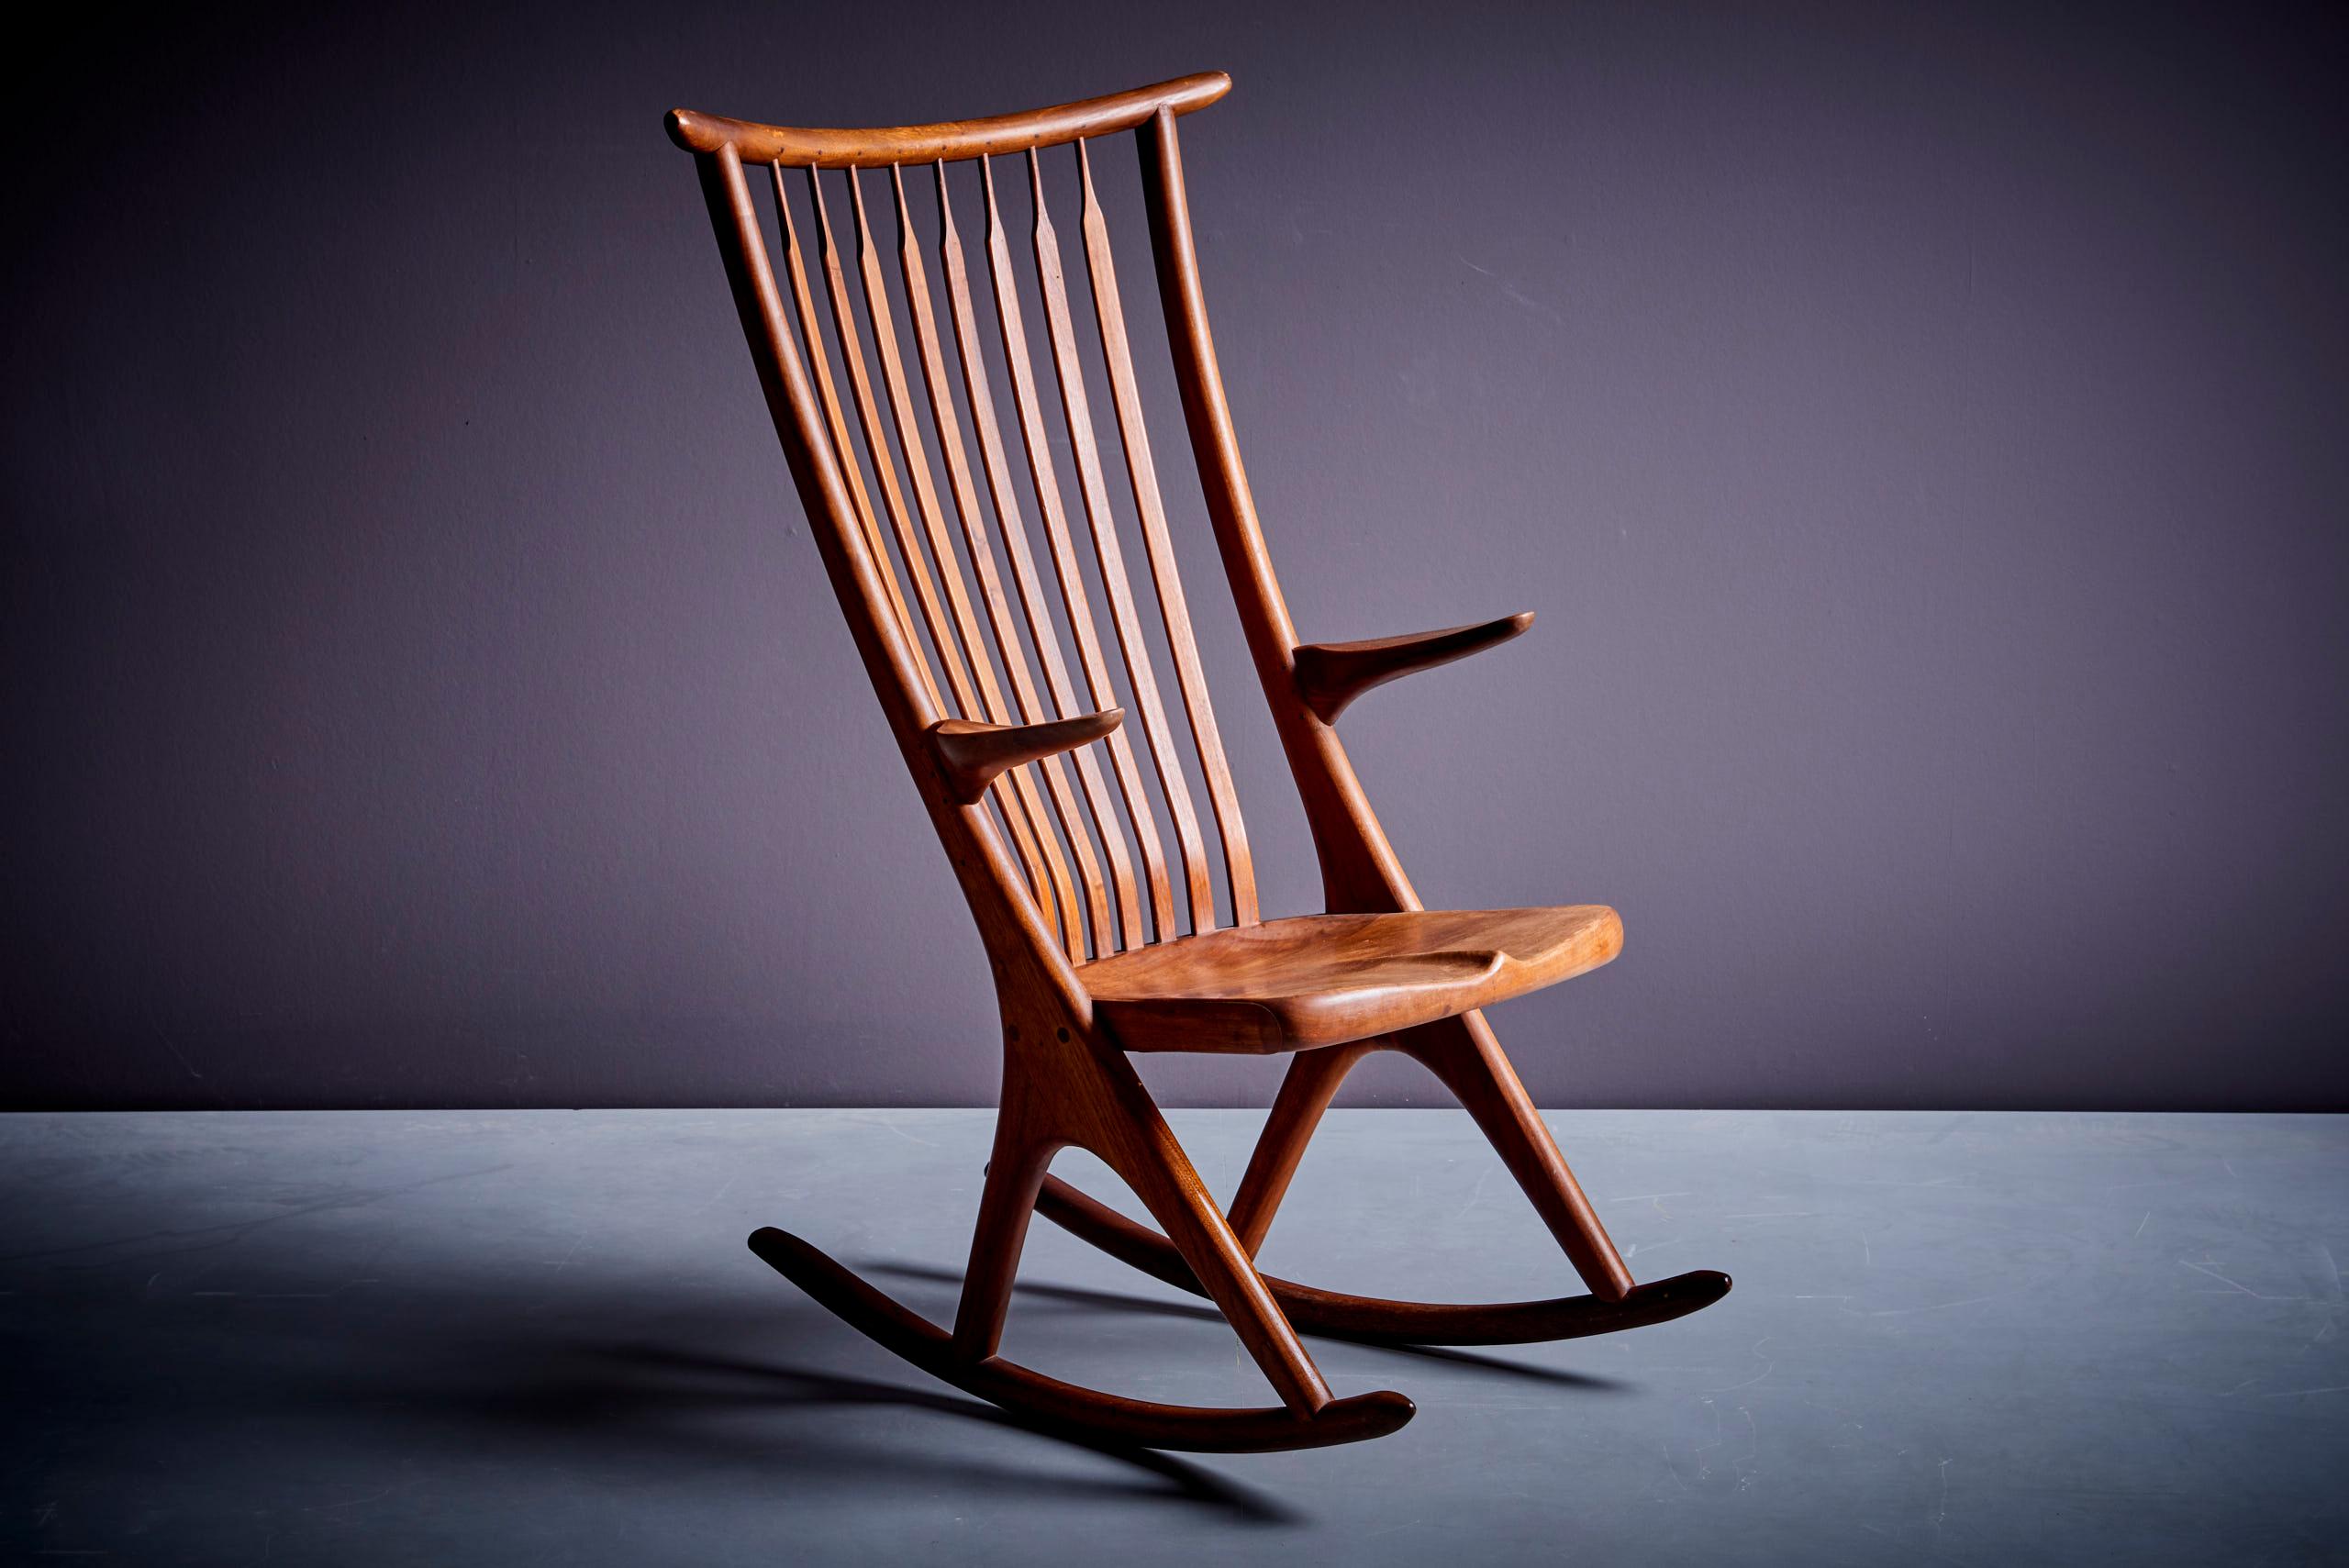 Custom, handmade studio rocking chair designed by Richard Harrison. This remarkable, lightweight and sculptural chair is made of walnut with. The chair has beautiful connections and is in a perfect condition.
R. Harrison was also published in the